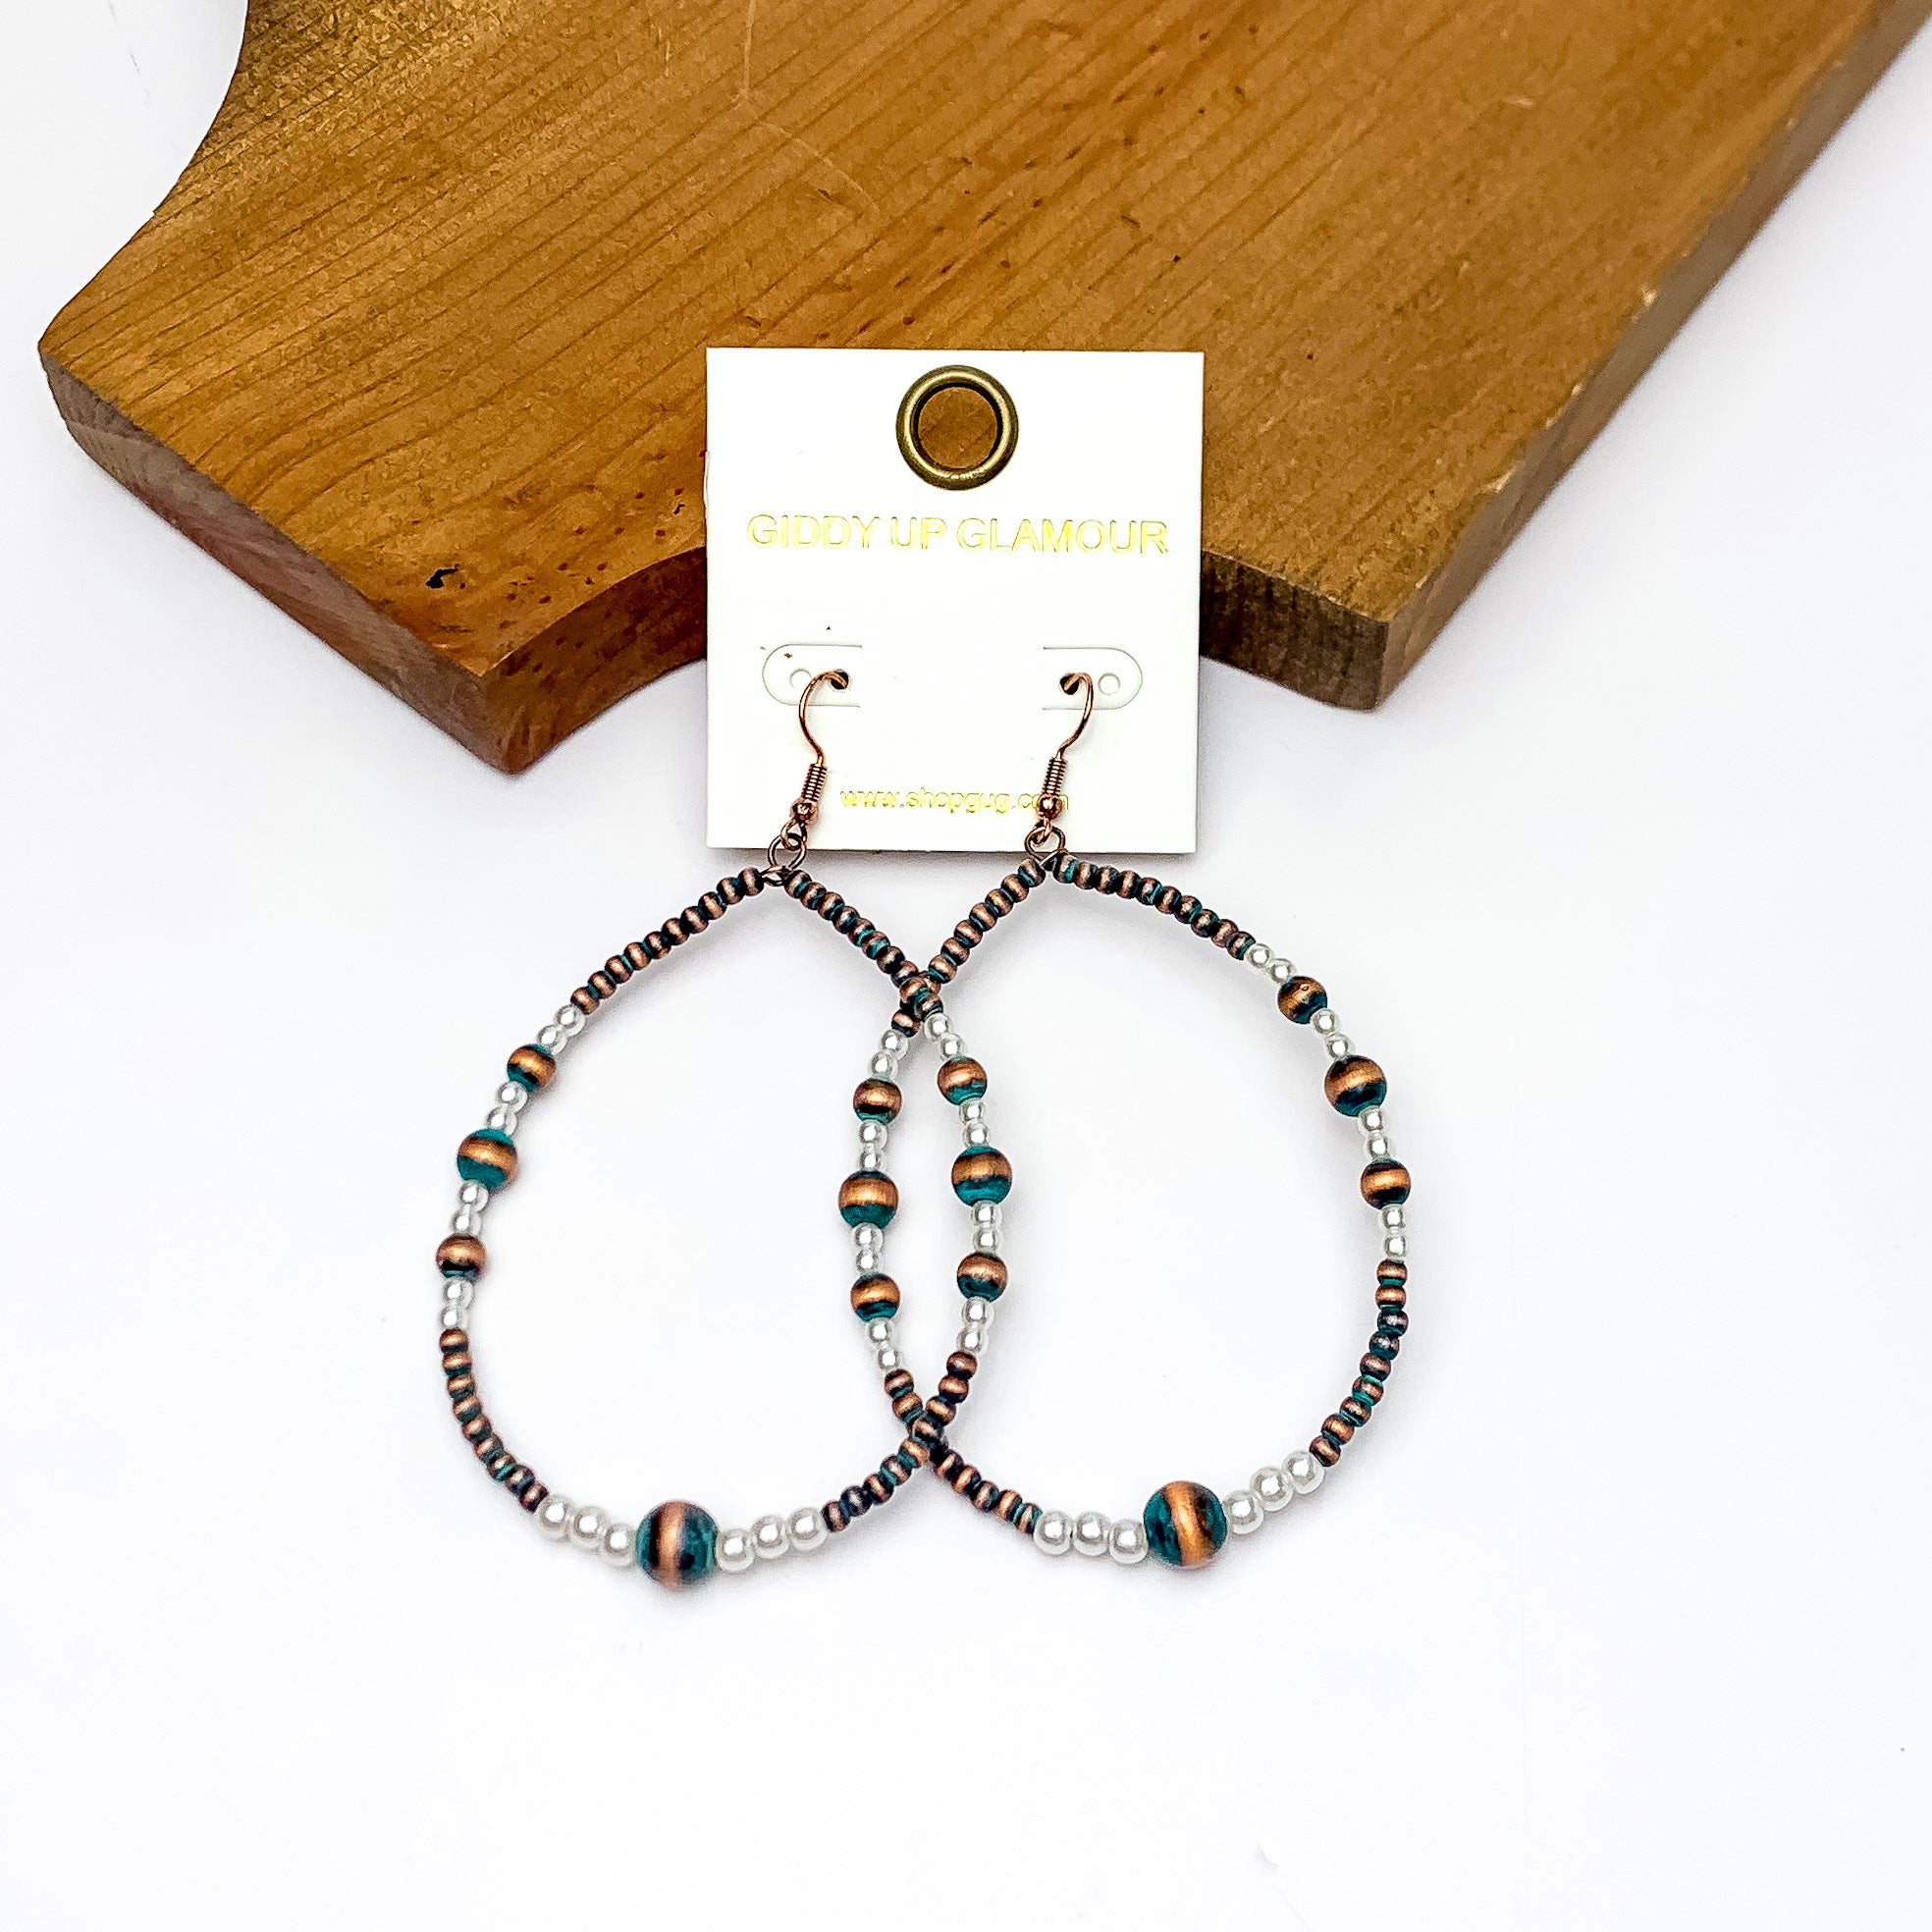 Open Teardrop Earrings With Beads in Patina and White. Pictured on a white background with the earrings against a wood piece.